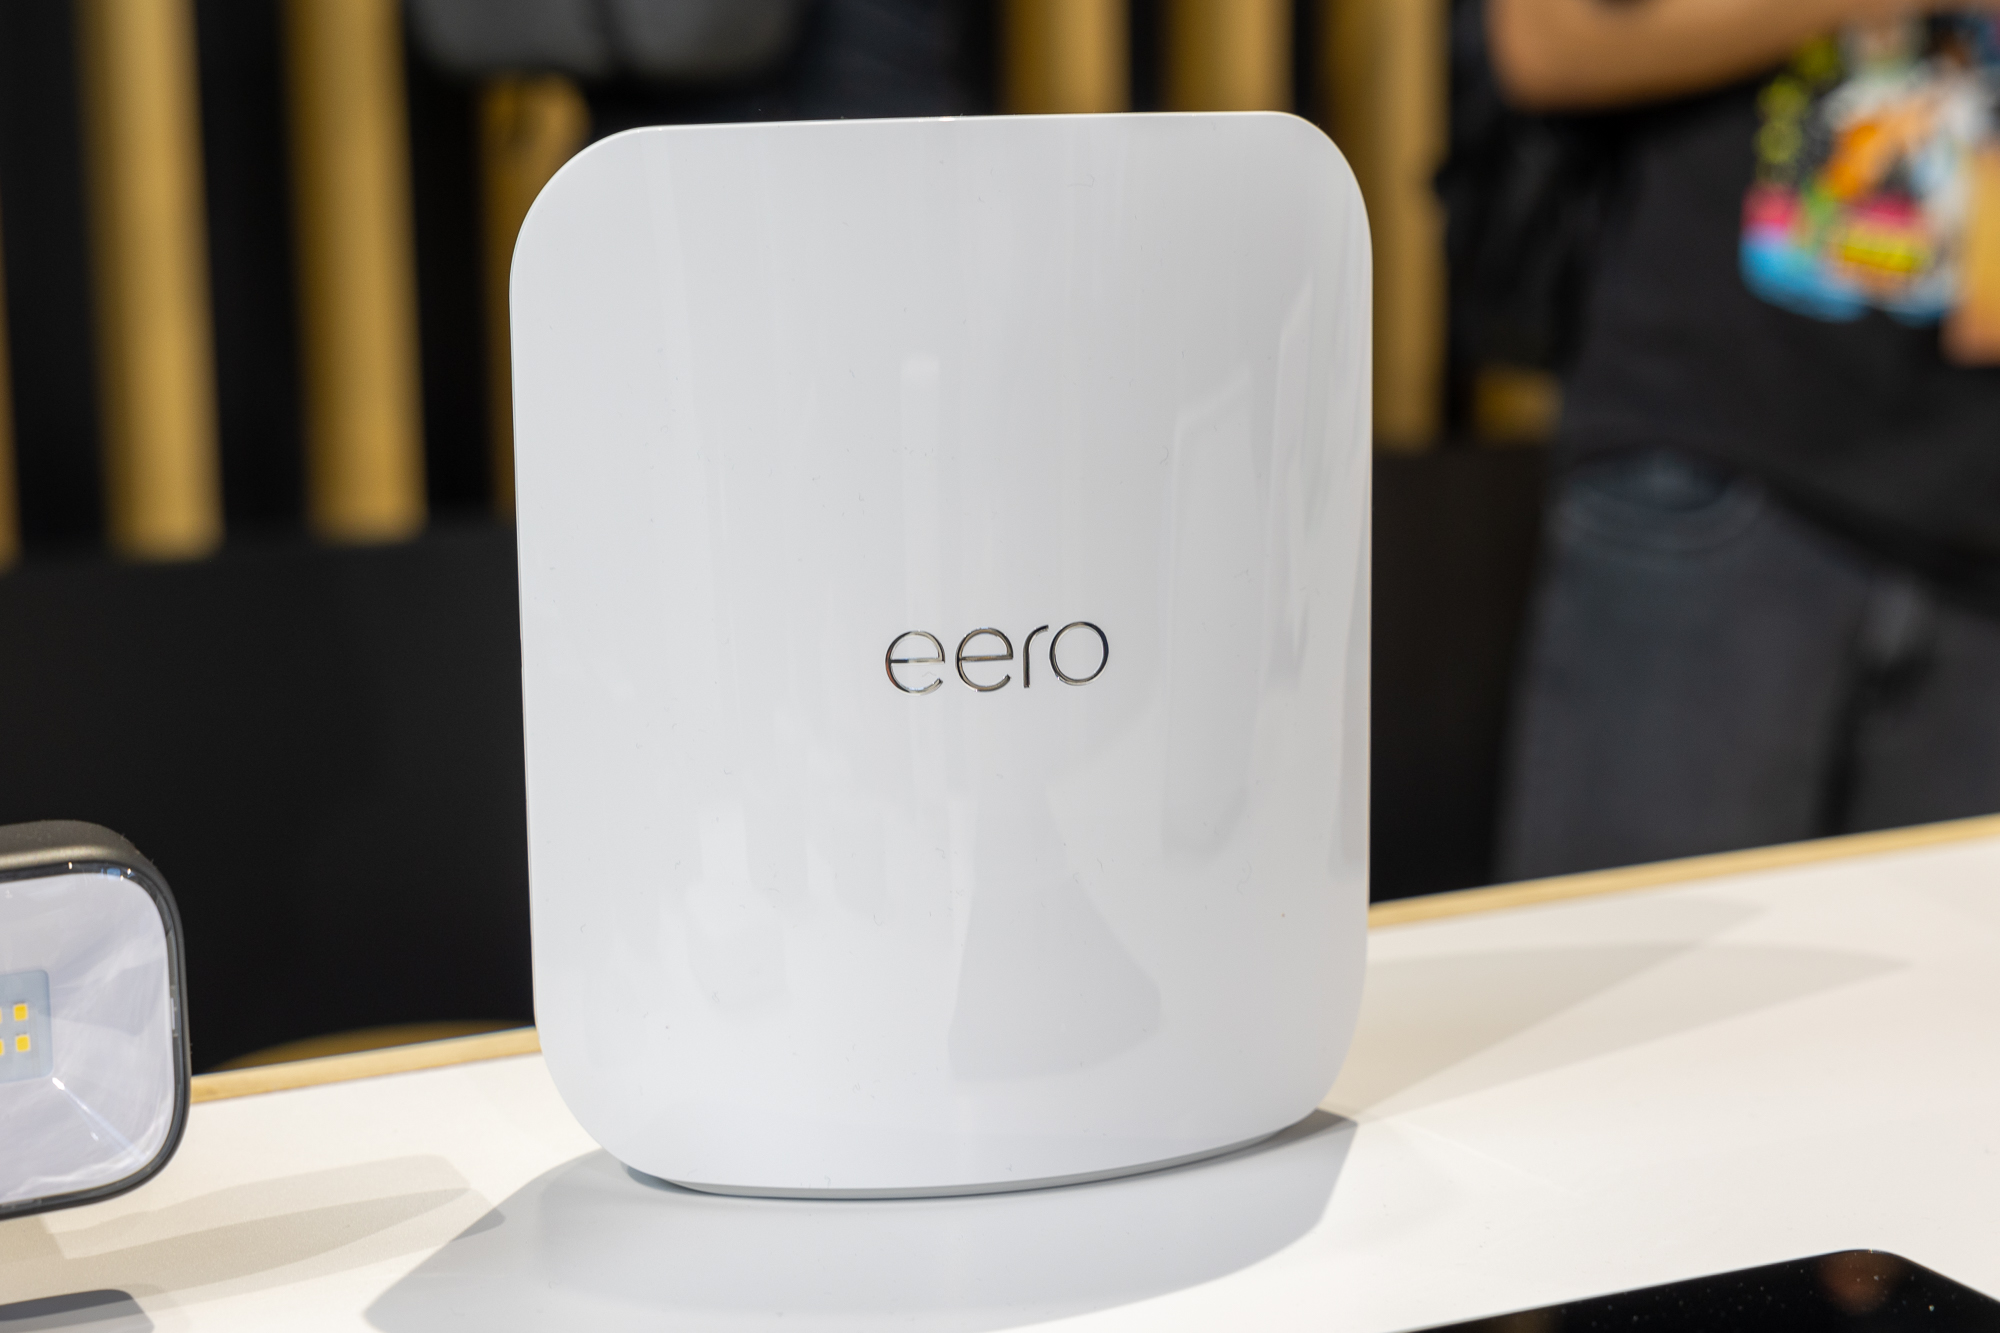 s eero Max 7 mesh Wi-Fi router offers amazing speeds and